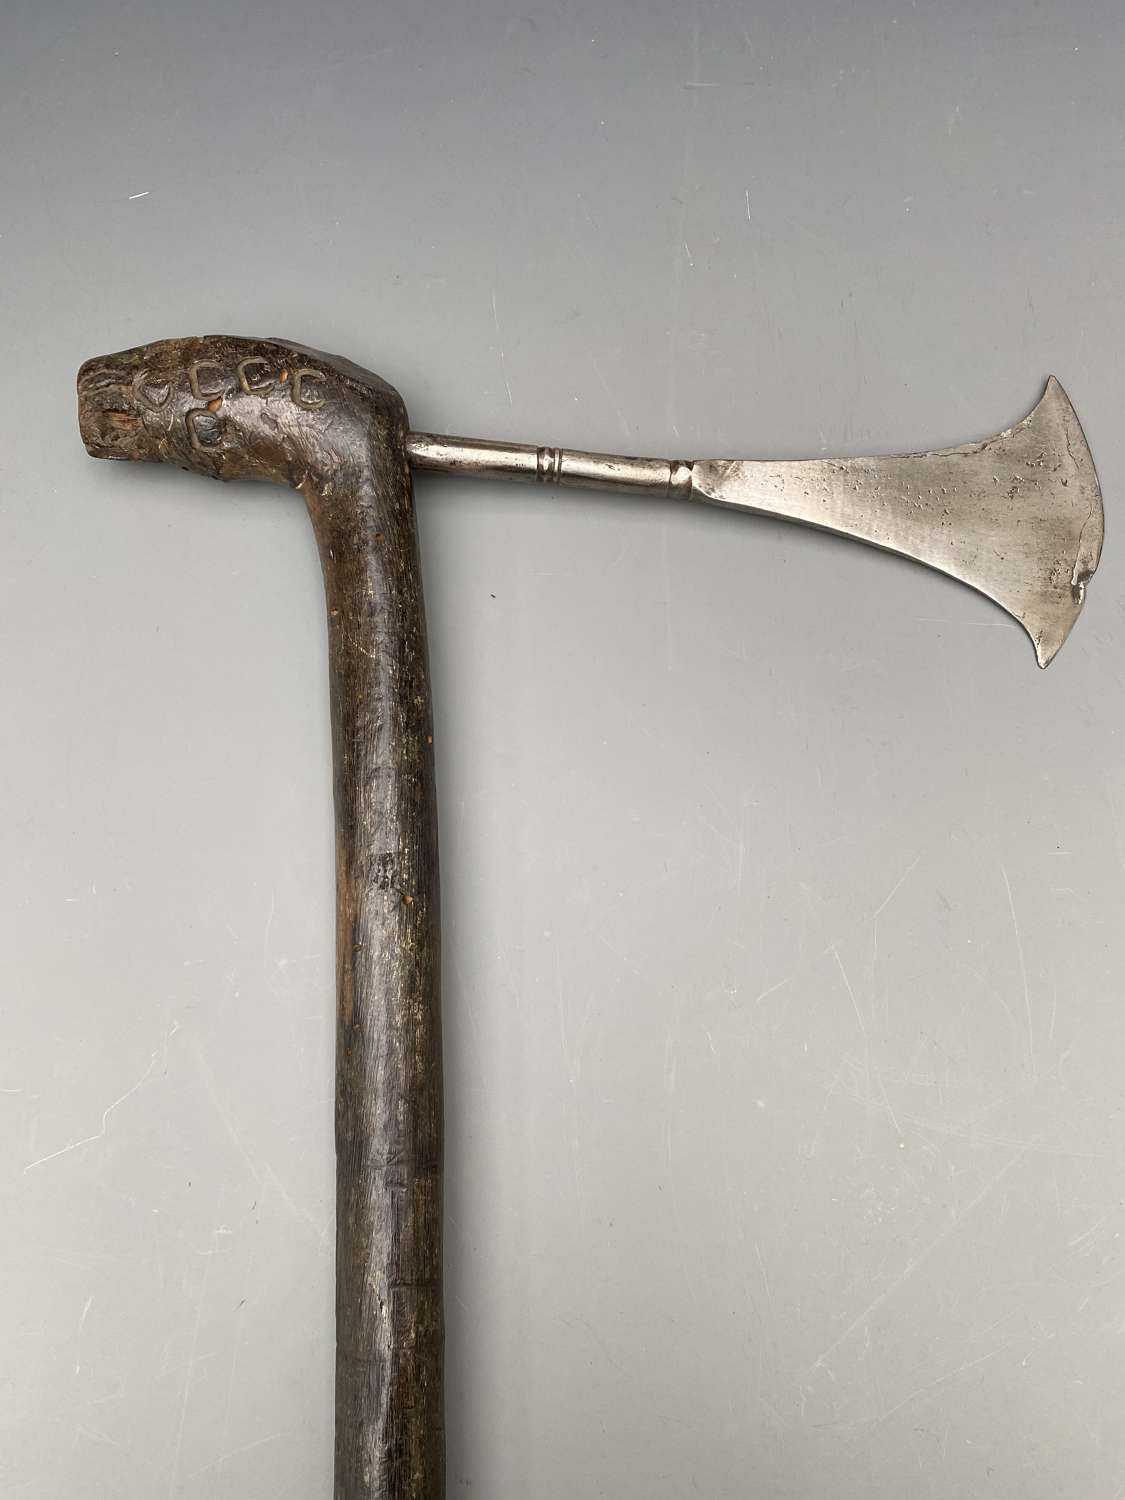 Congo Axe with a Polished iron blade and stained wood handle